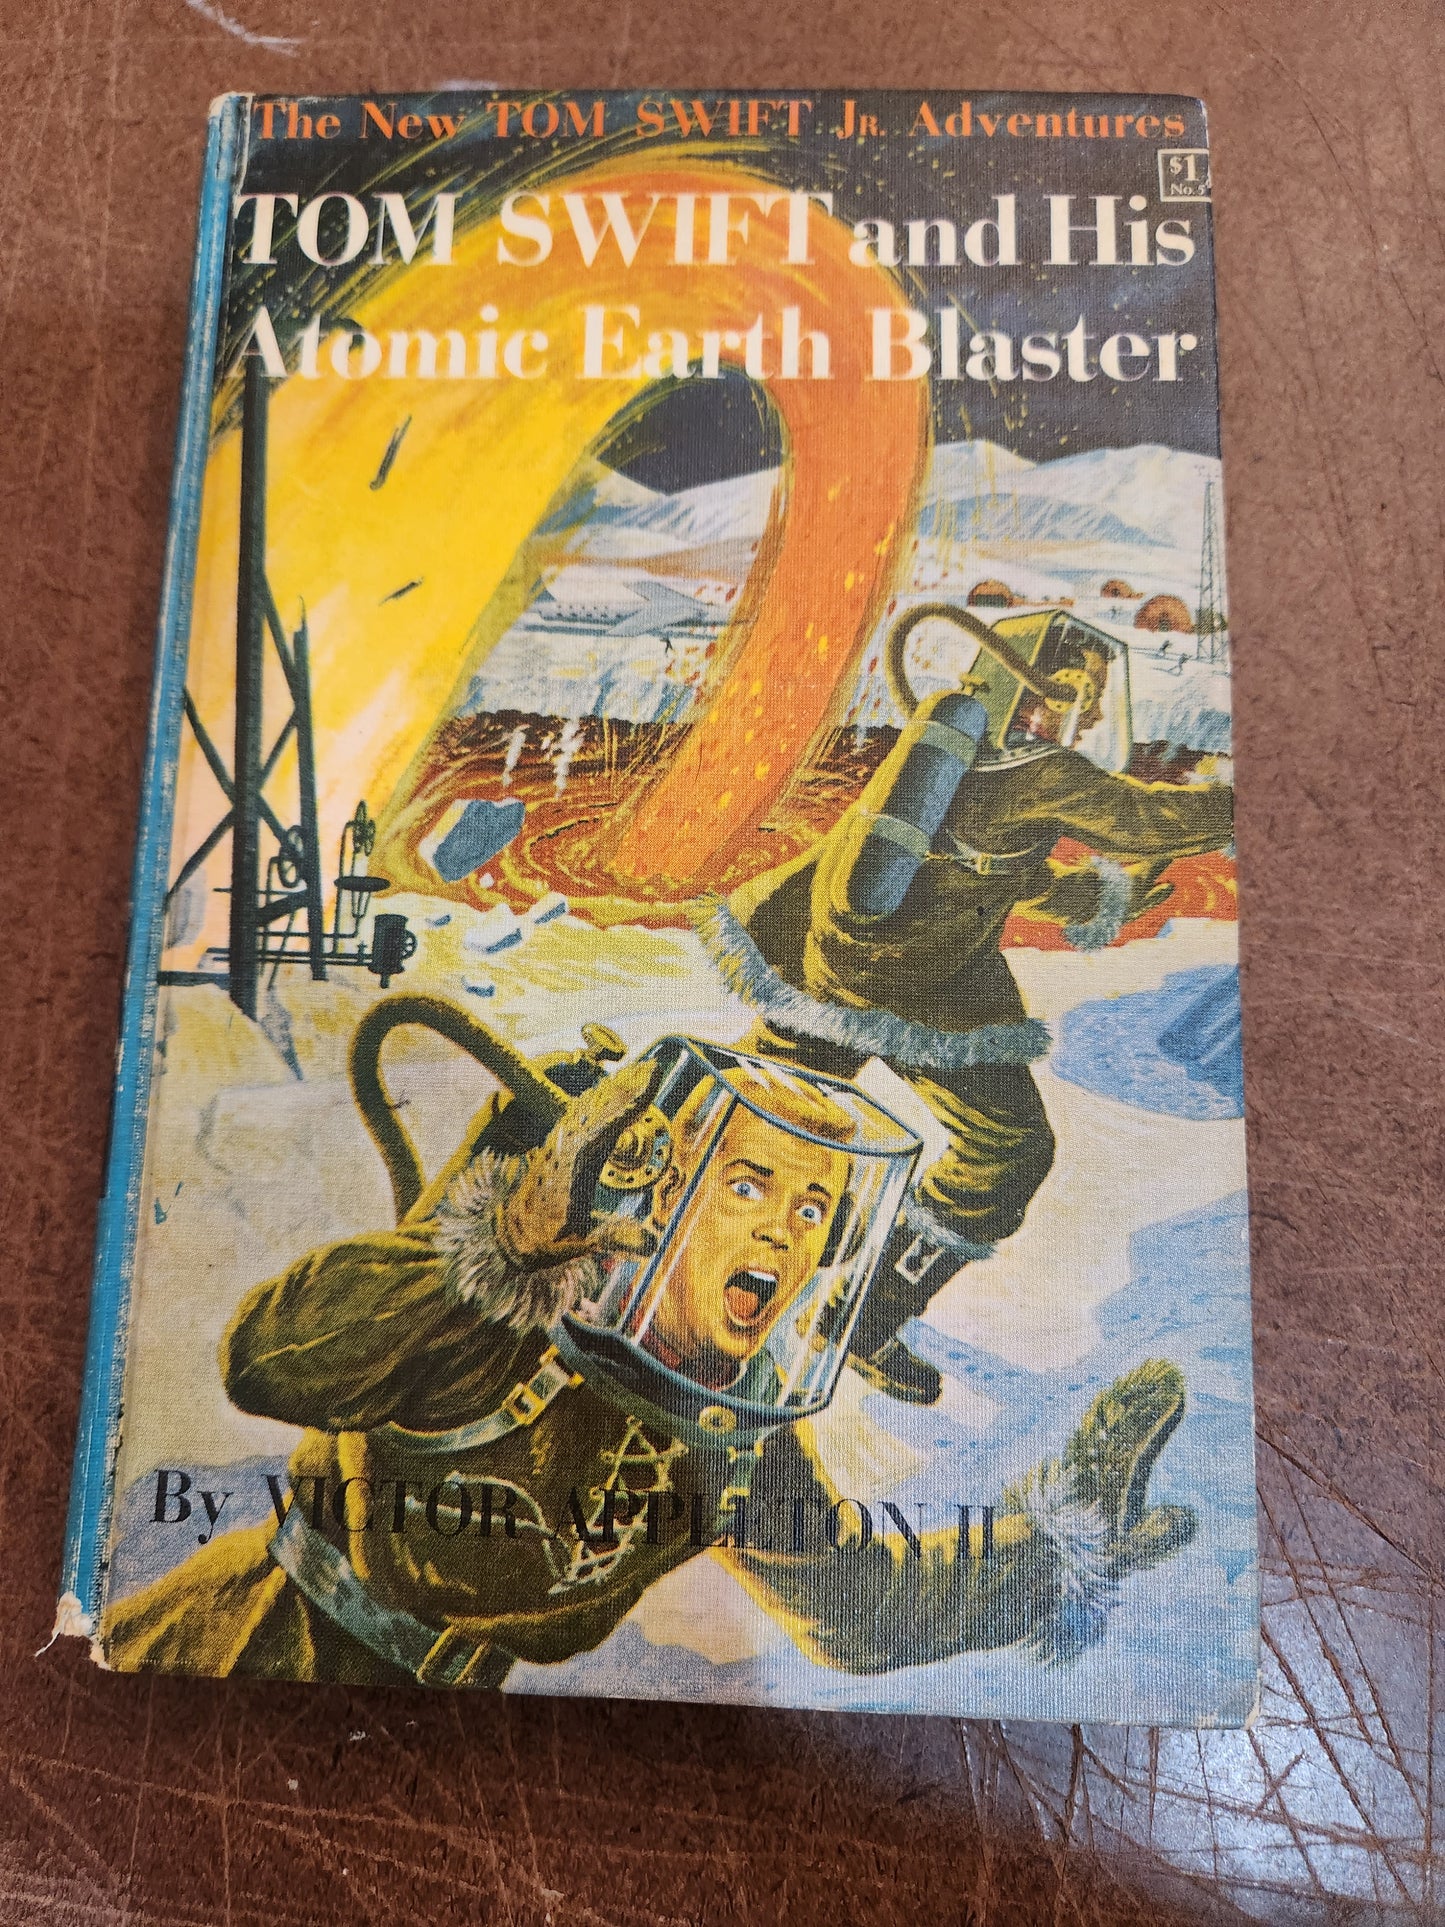 "Tom Swift and His Atomic Earth Blaster", by Victor Appleton II (Blue Spine)